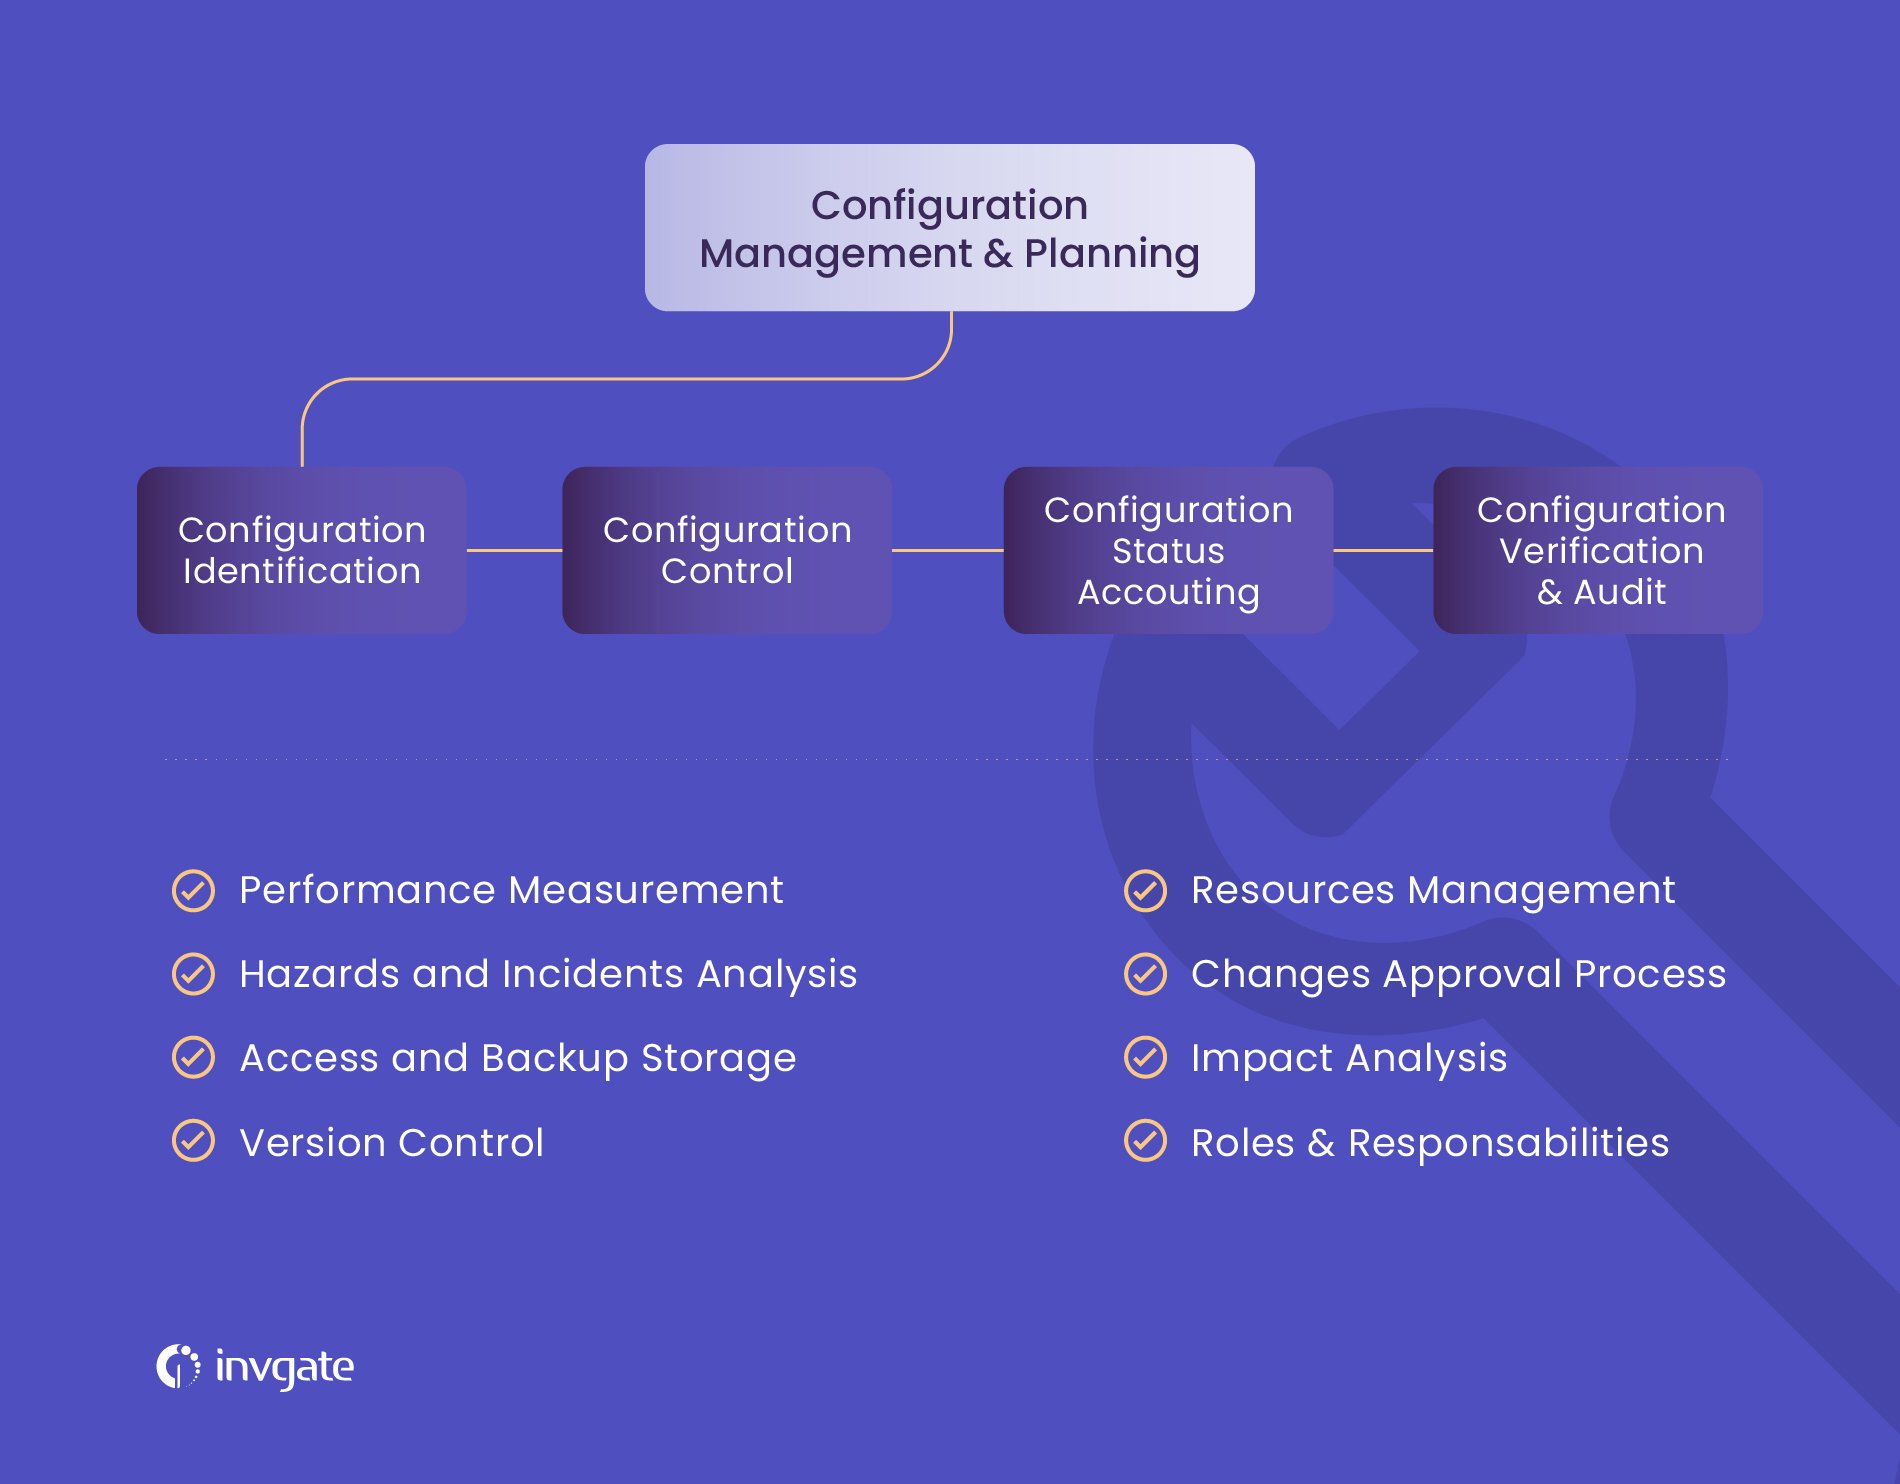 what is included in configuration management and planning